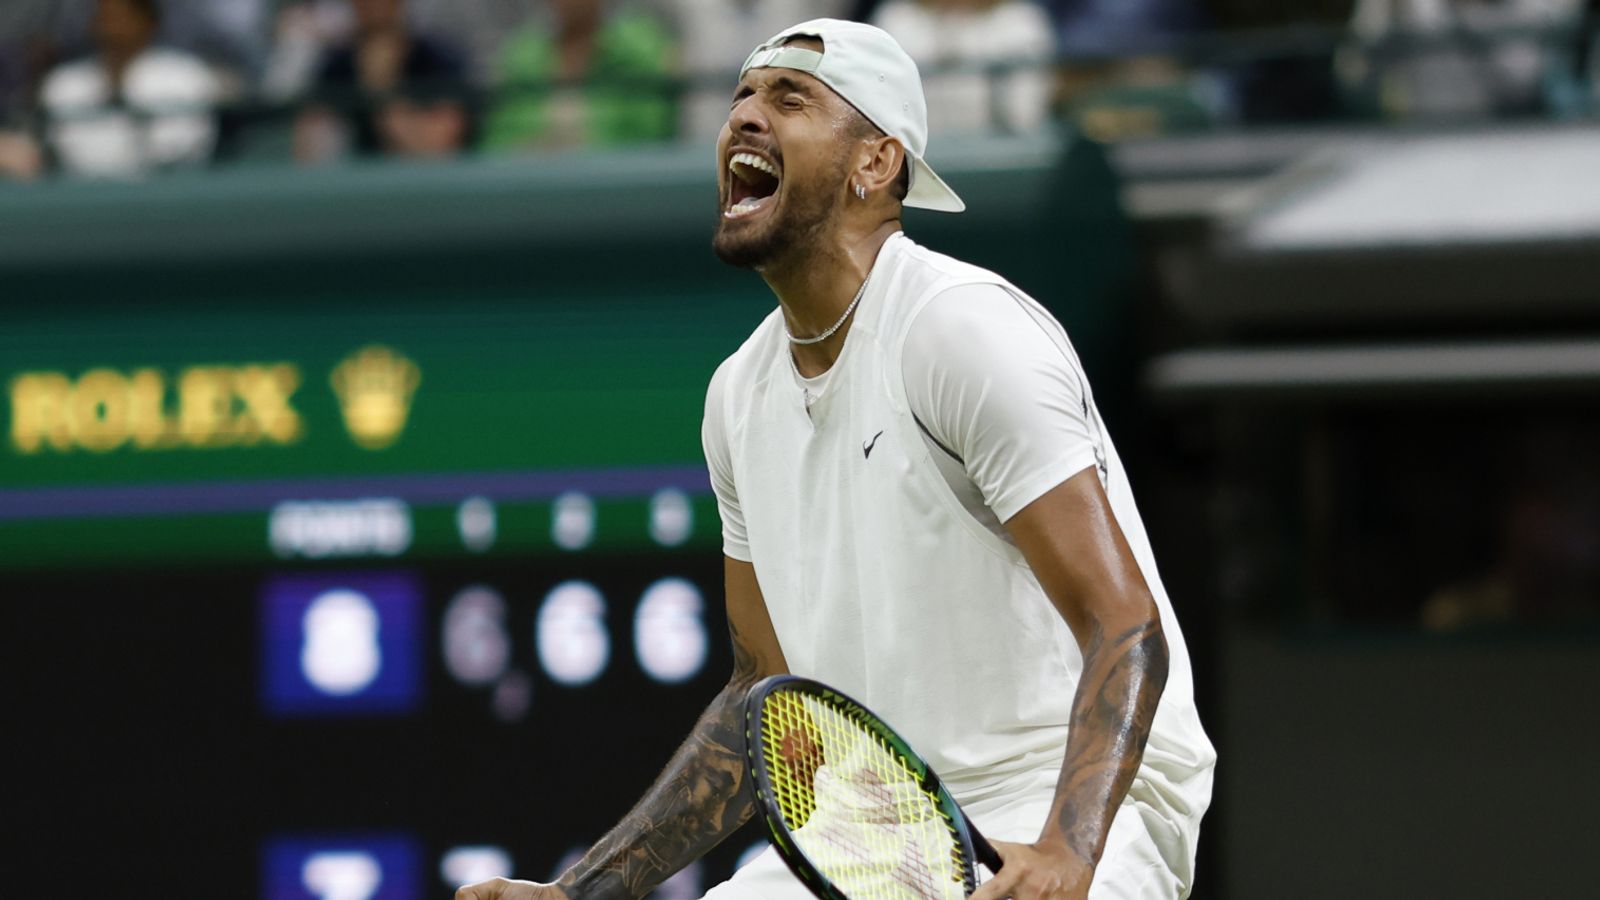 Wimbledon: Nick Kyrgios joins Rafael Nadal in the second week of the Grand Slam after fiery clash | Tennis News